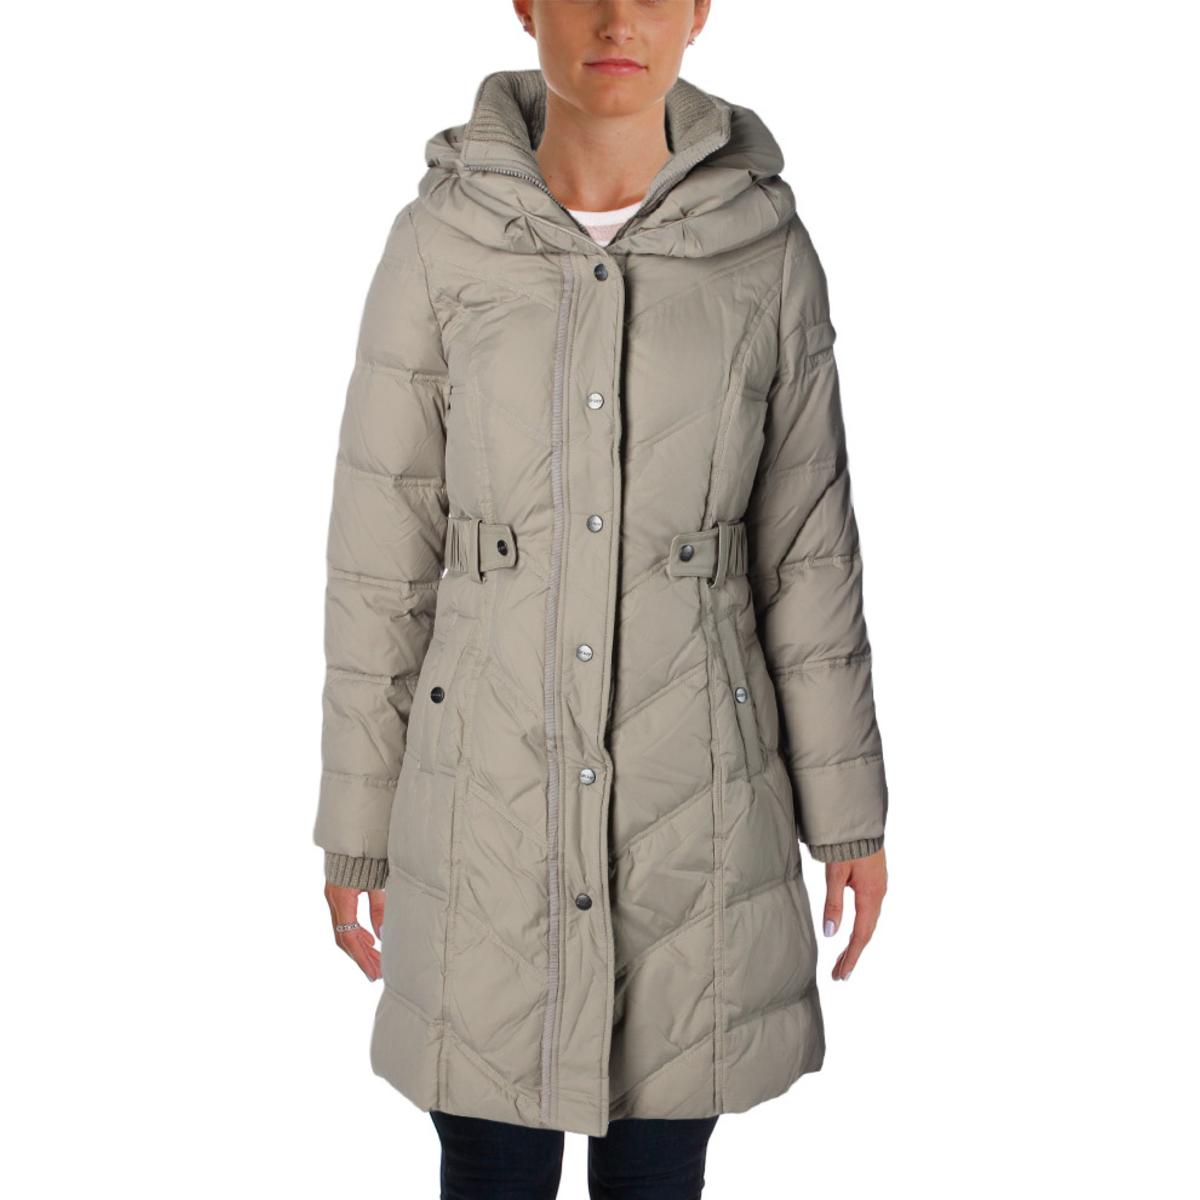 DKNY 5518 Womens Down Quilted Water Repellent Parka Coat BHFO | eBay